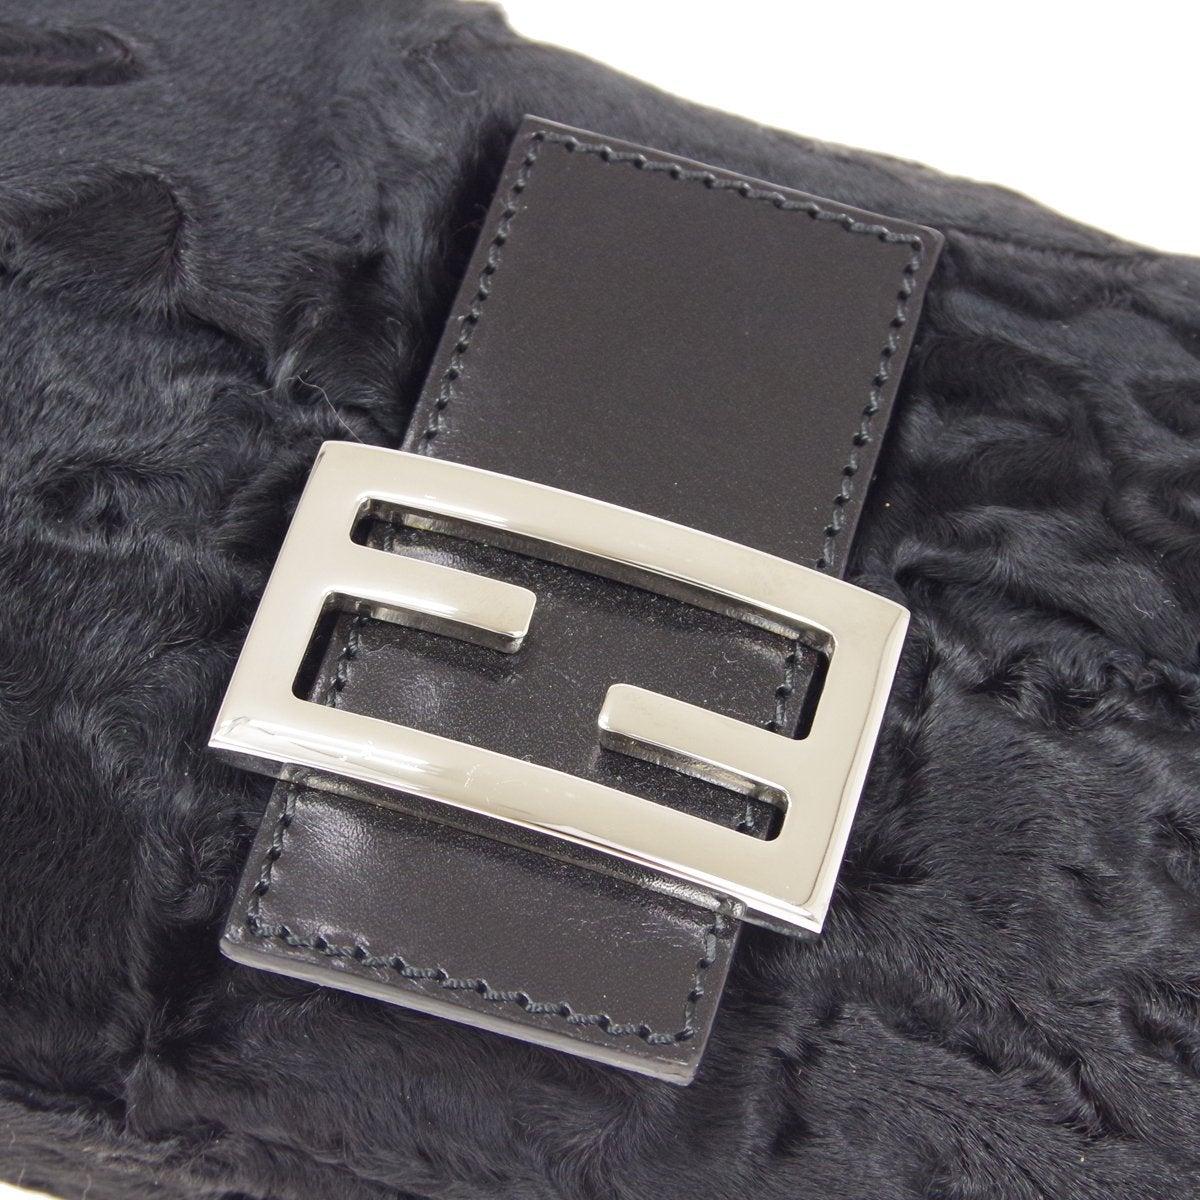 Pre-Owned Vintage Condition
Fur
Leather Trim
Silver Tone Hardware
Satin Lining
Measures 9.75